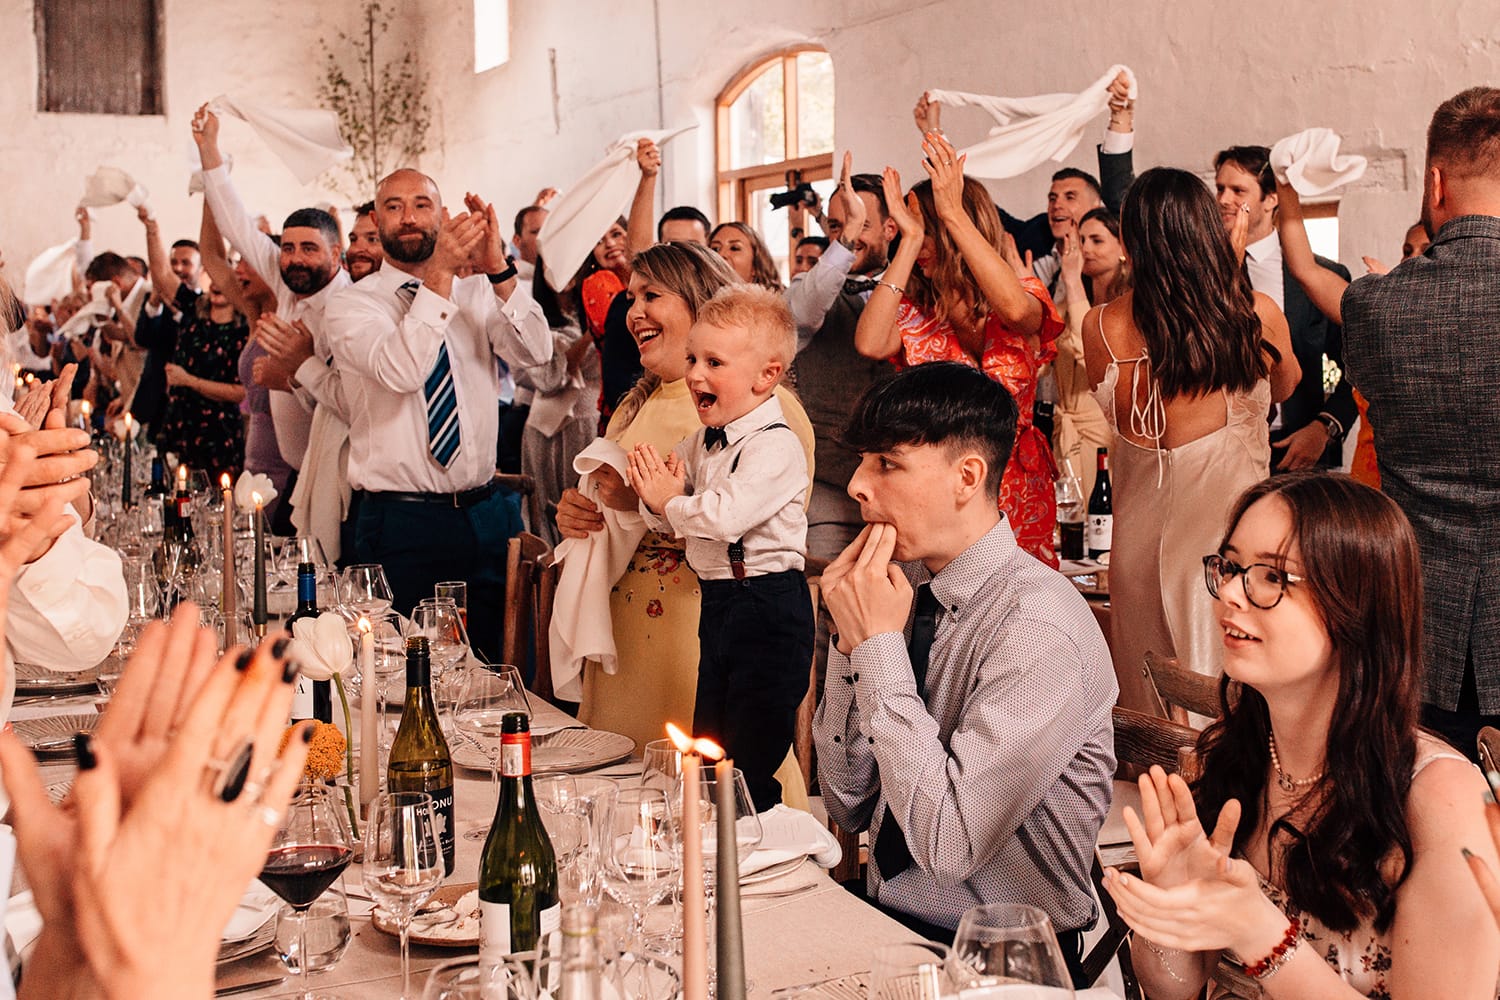 All the wedding guests waving their napkins, cheering and standing on their chairs welcoming the couple into the room